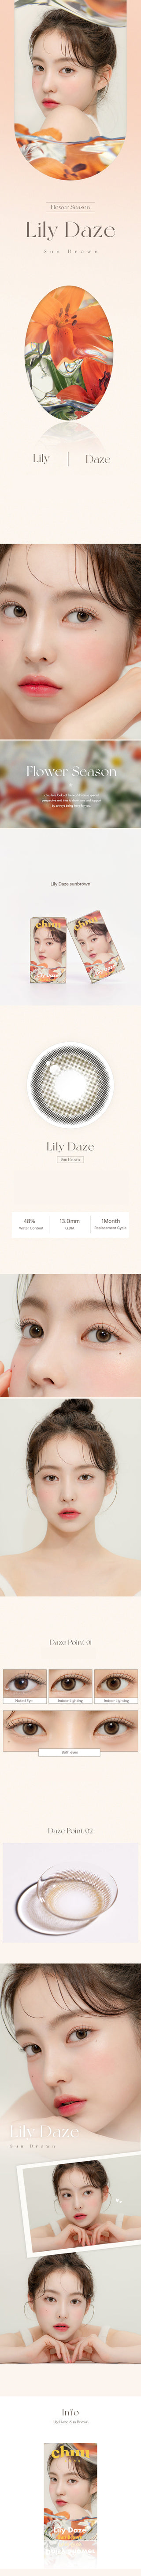 Chuu Lily Daze Sun Brown colored contacts circle lenses - EyeCandy's